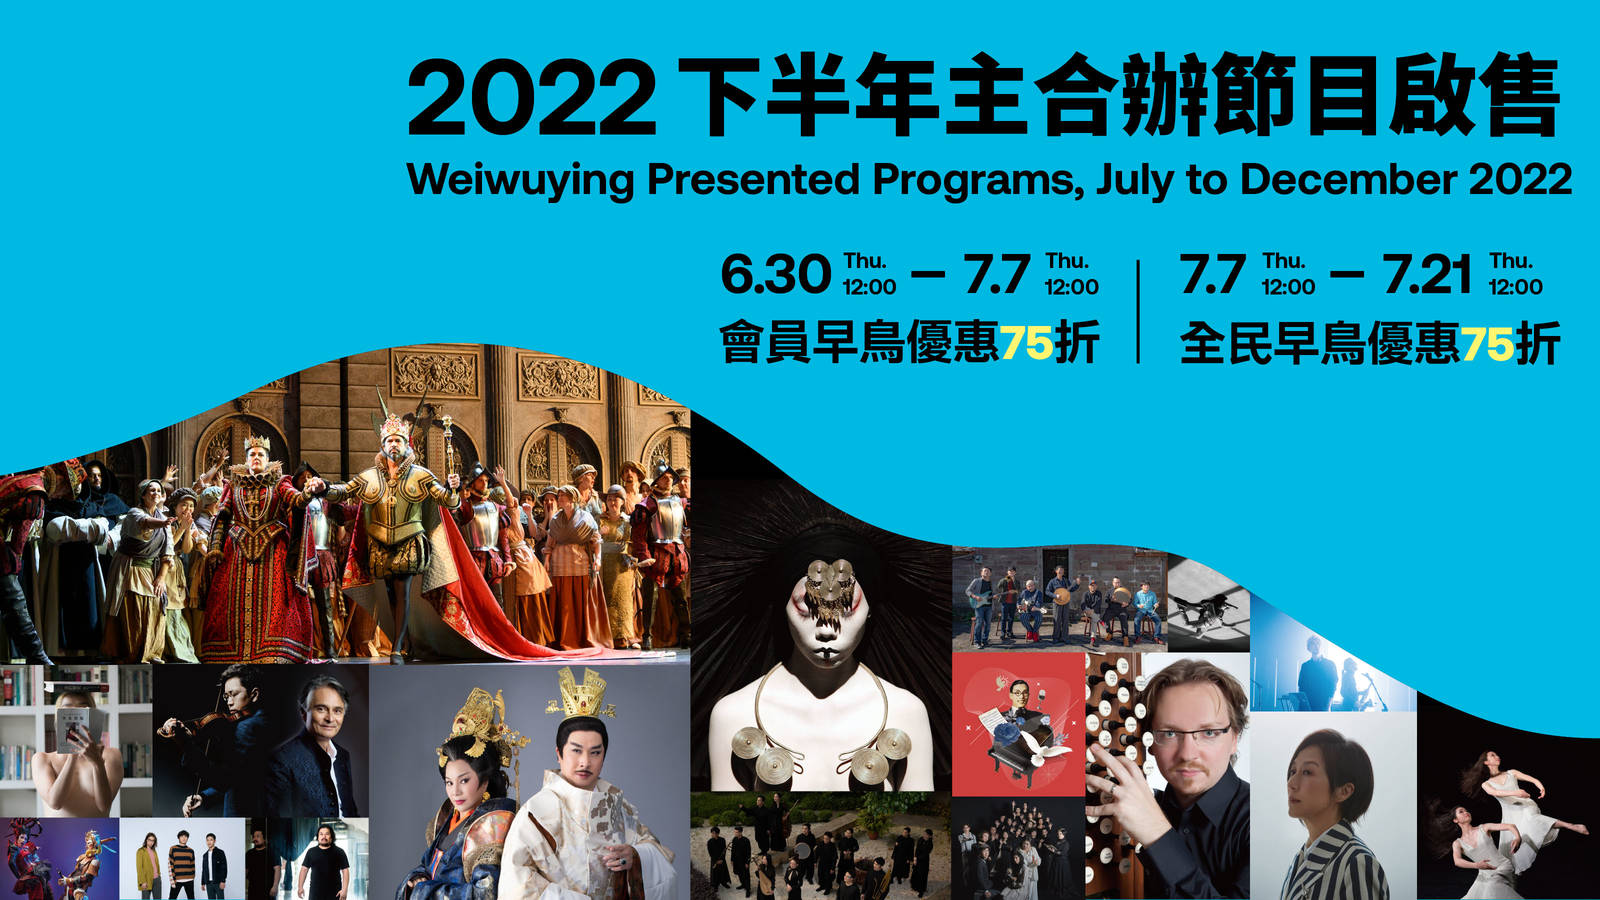 Weiwuying Presented Programs, July to December 2022